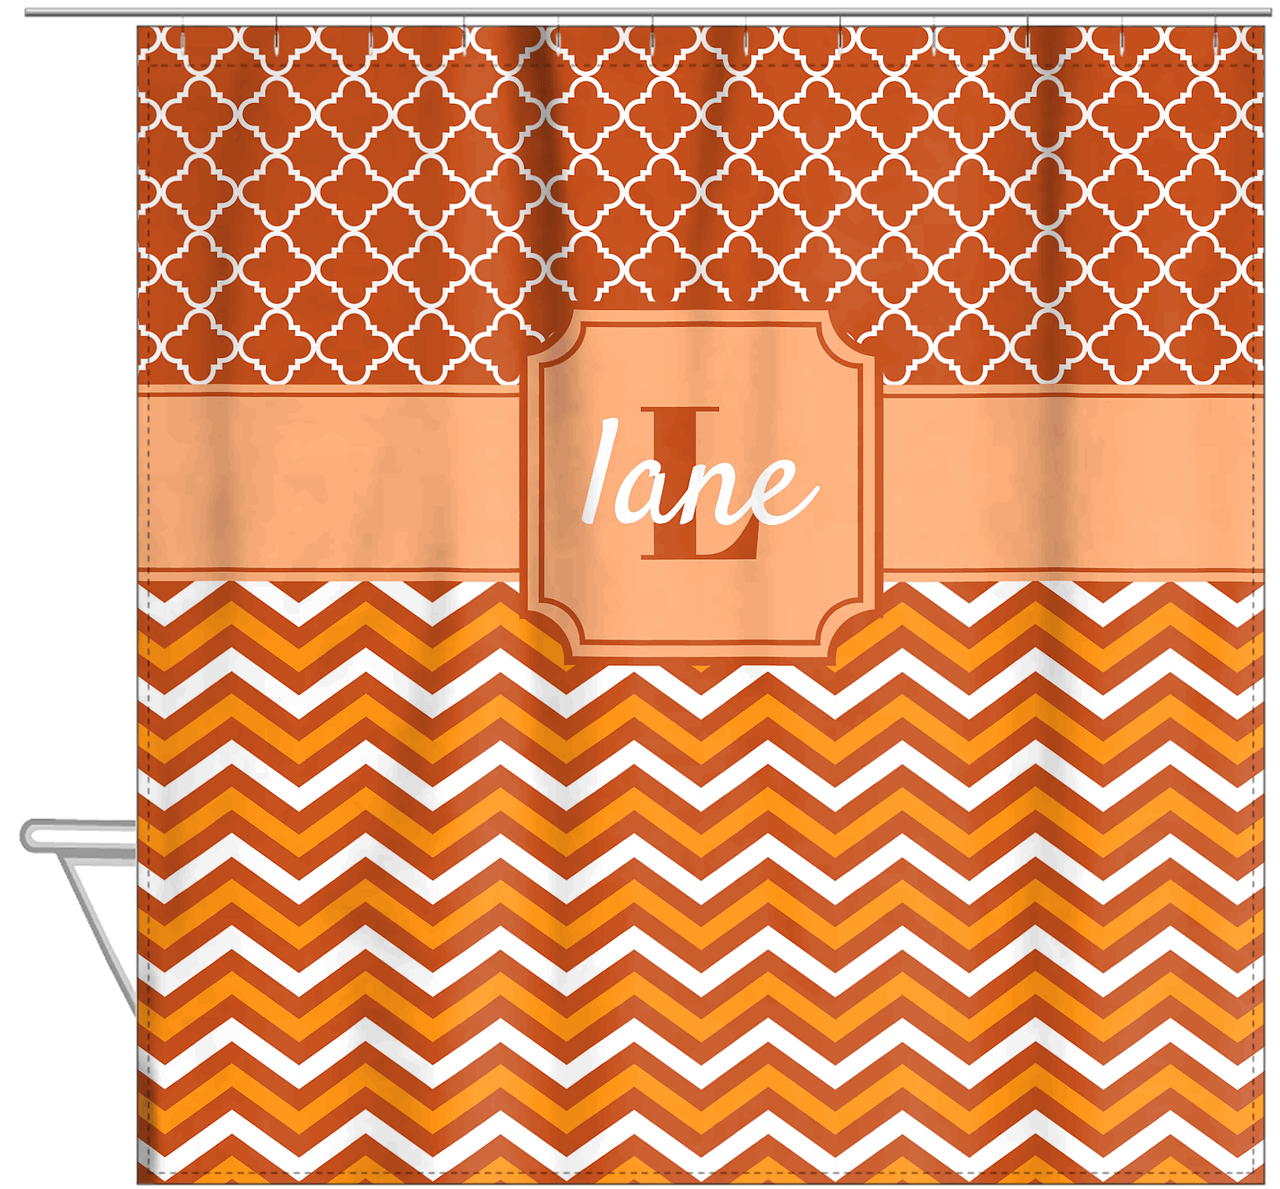 Personalized Quatrefoil and Chevron II Shower Curtain - Orange and White - Stamp Nameplate - Hanging View